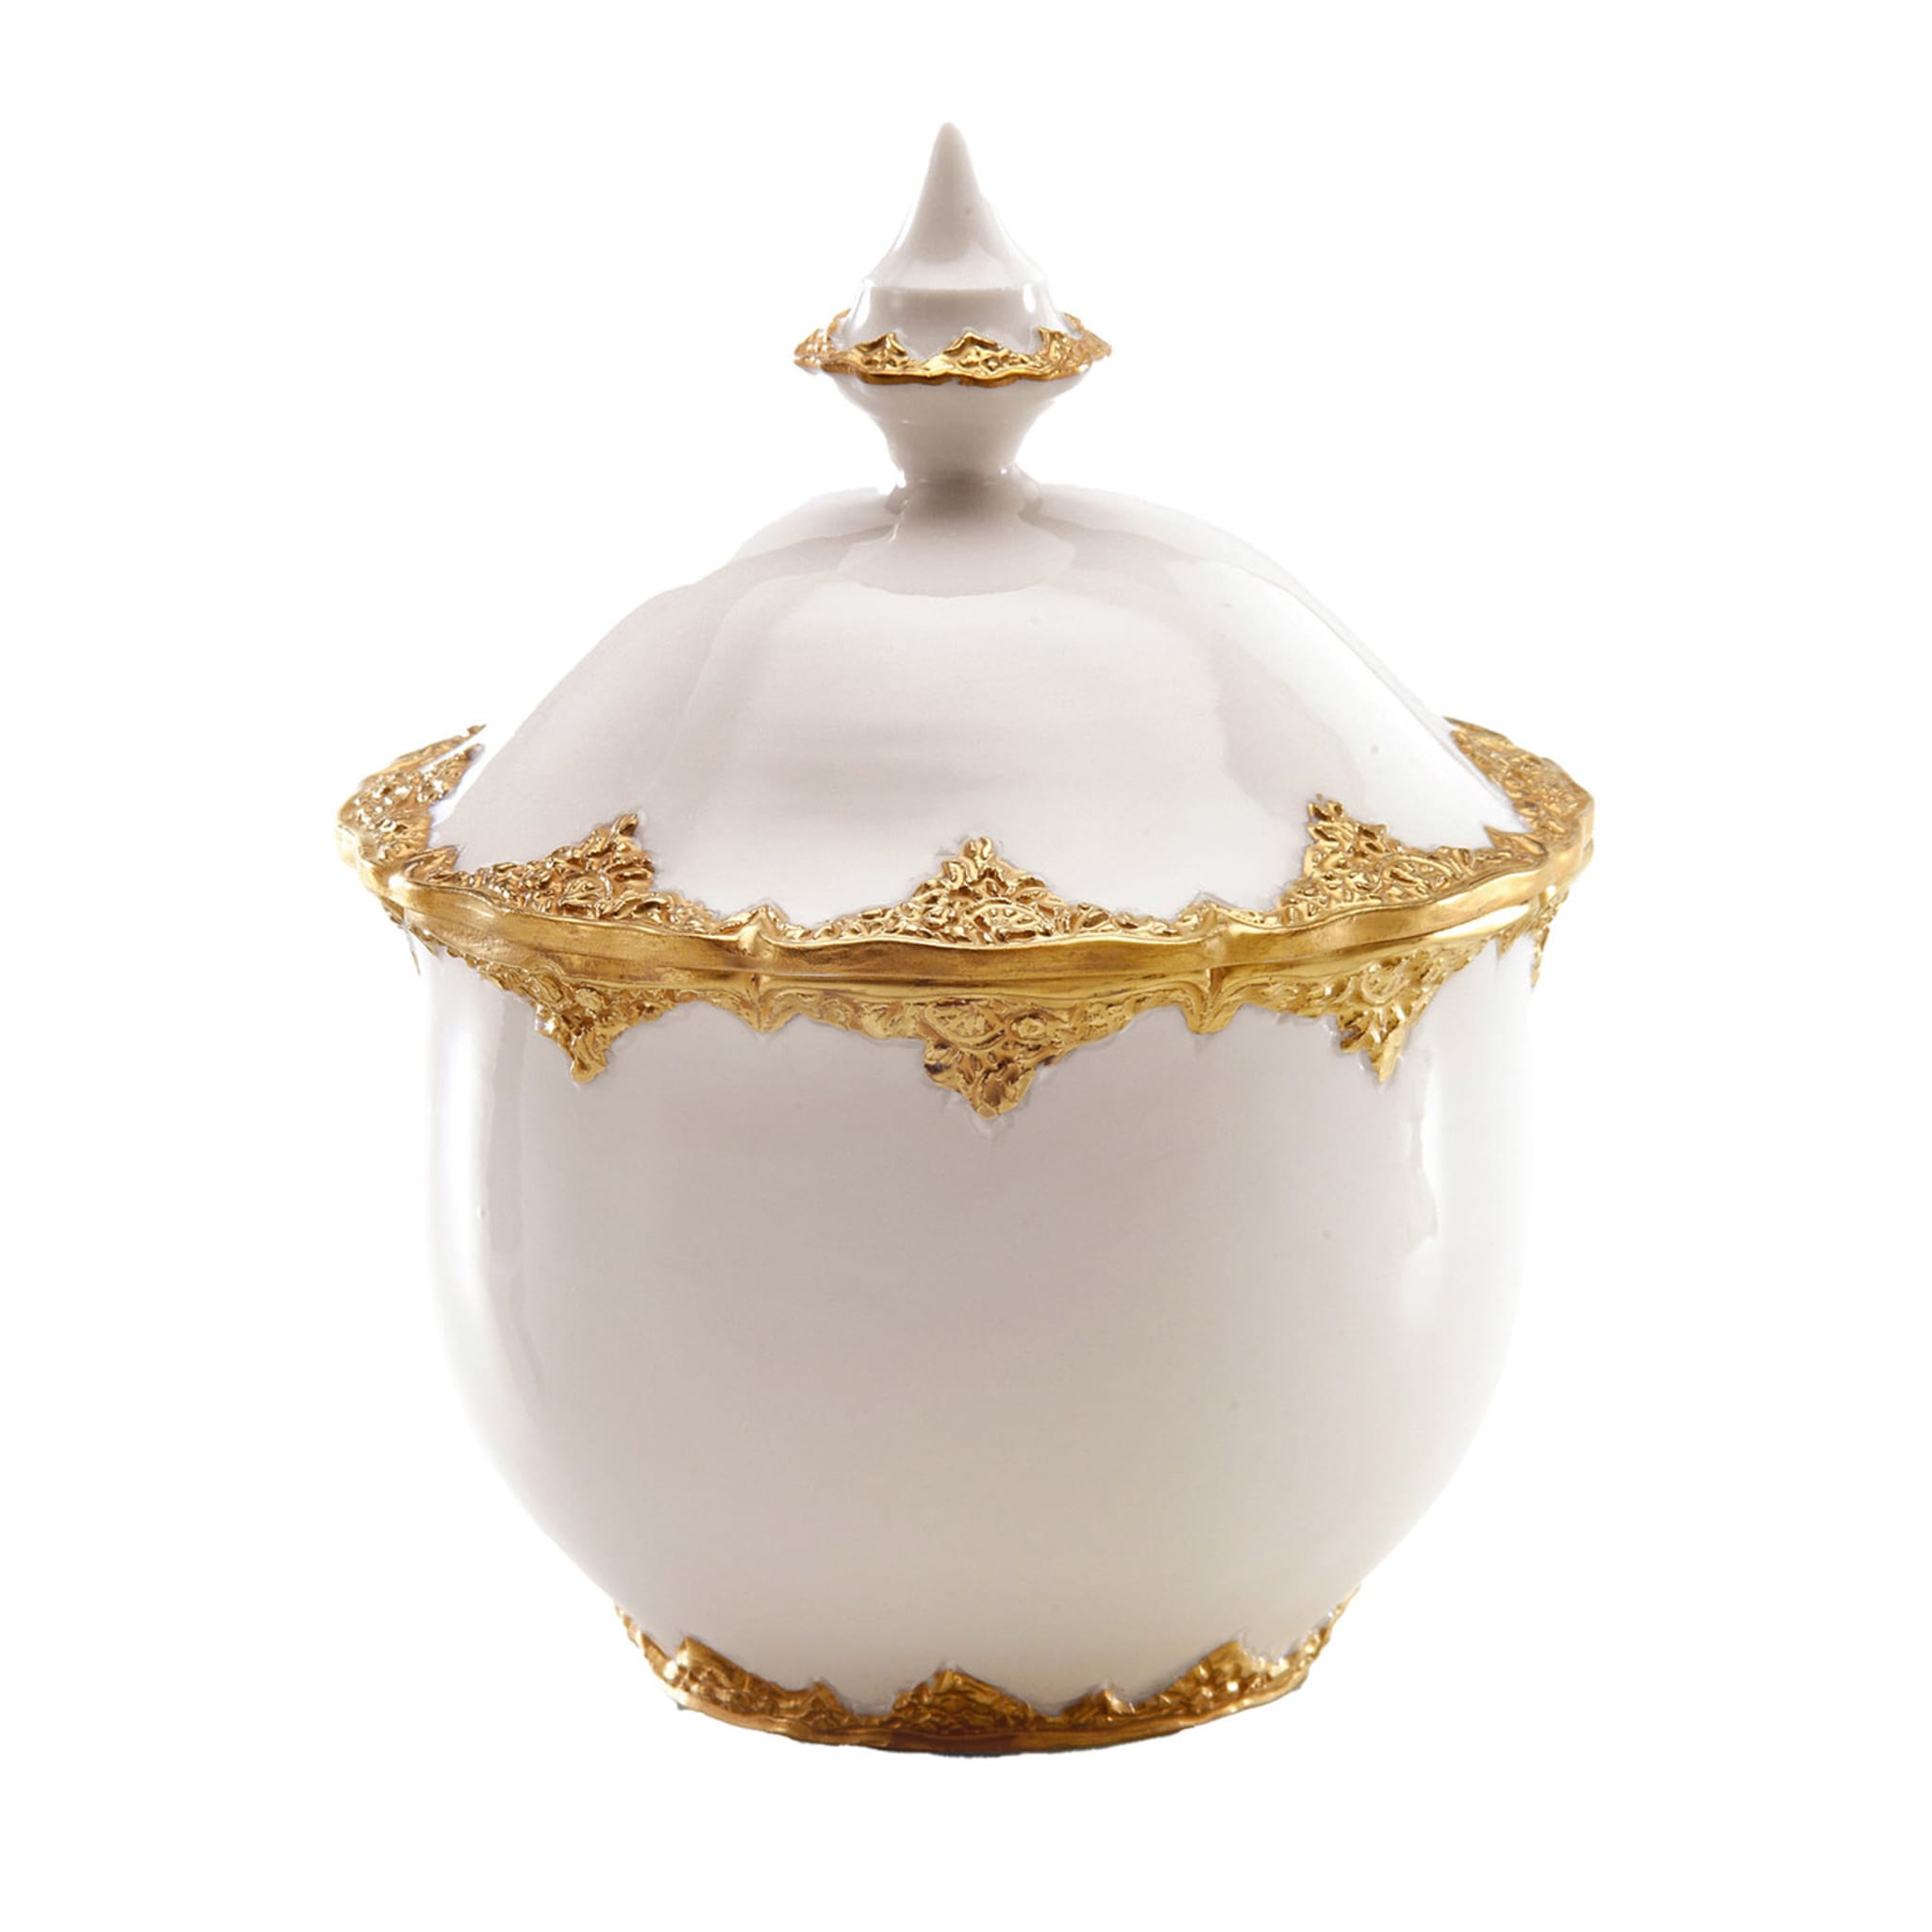 Irene White & Gold Sugar Bowl with Lid - Main view